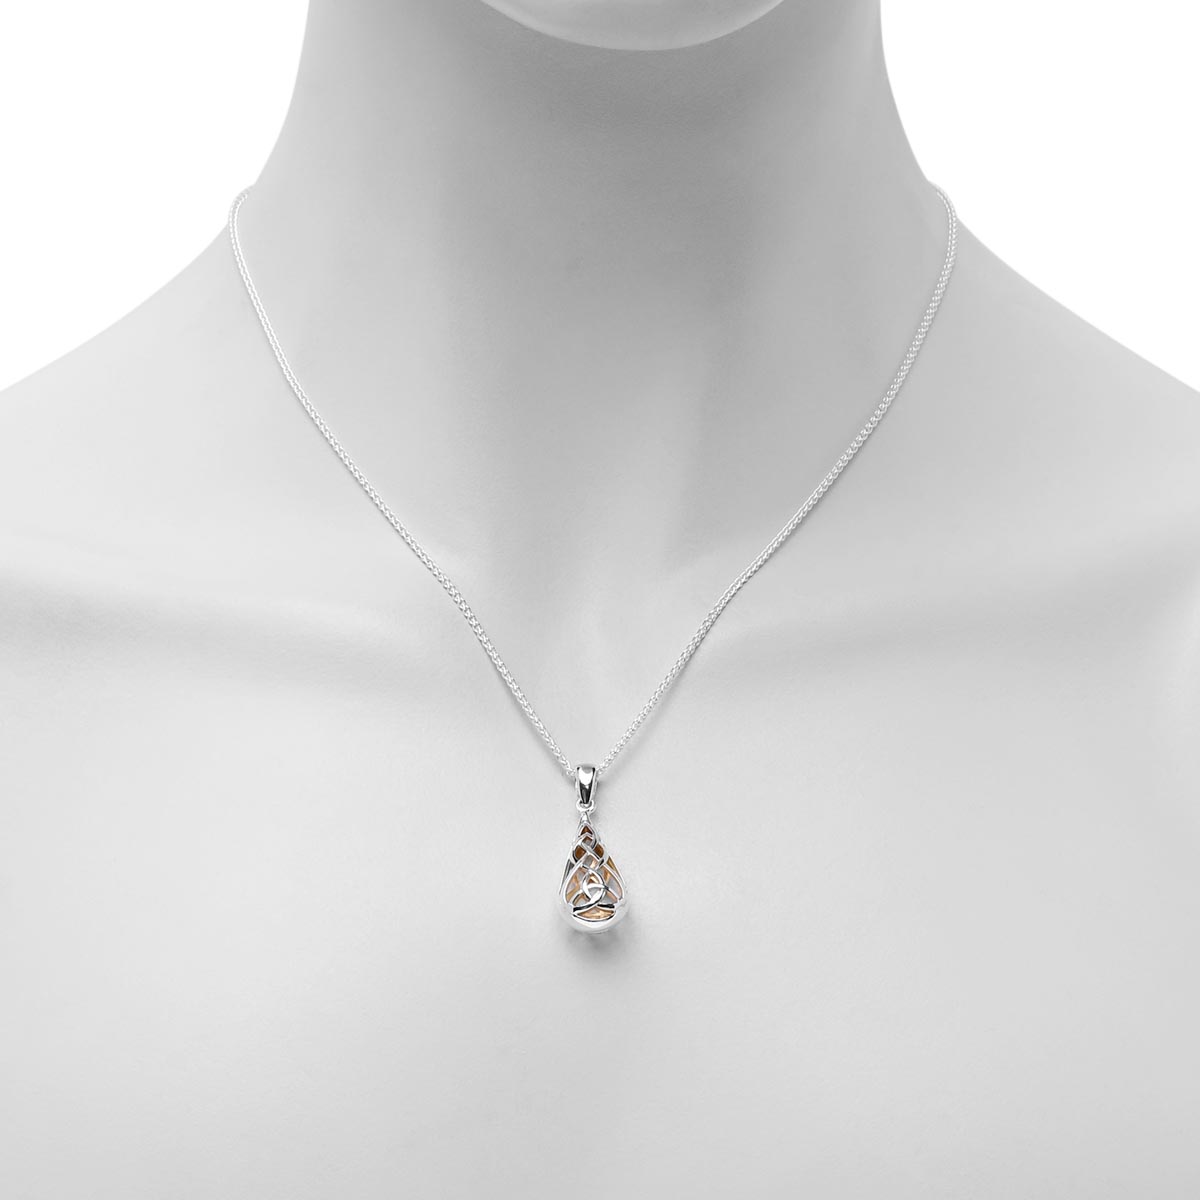 Keith Jack Trinity Teardrop Necklace in Sterling Silver with 22kt Yellow Gold